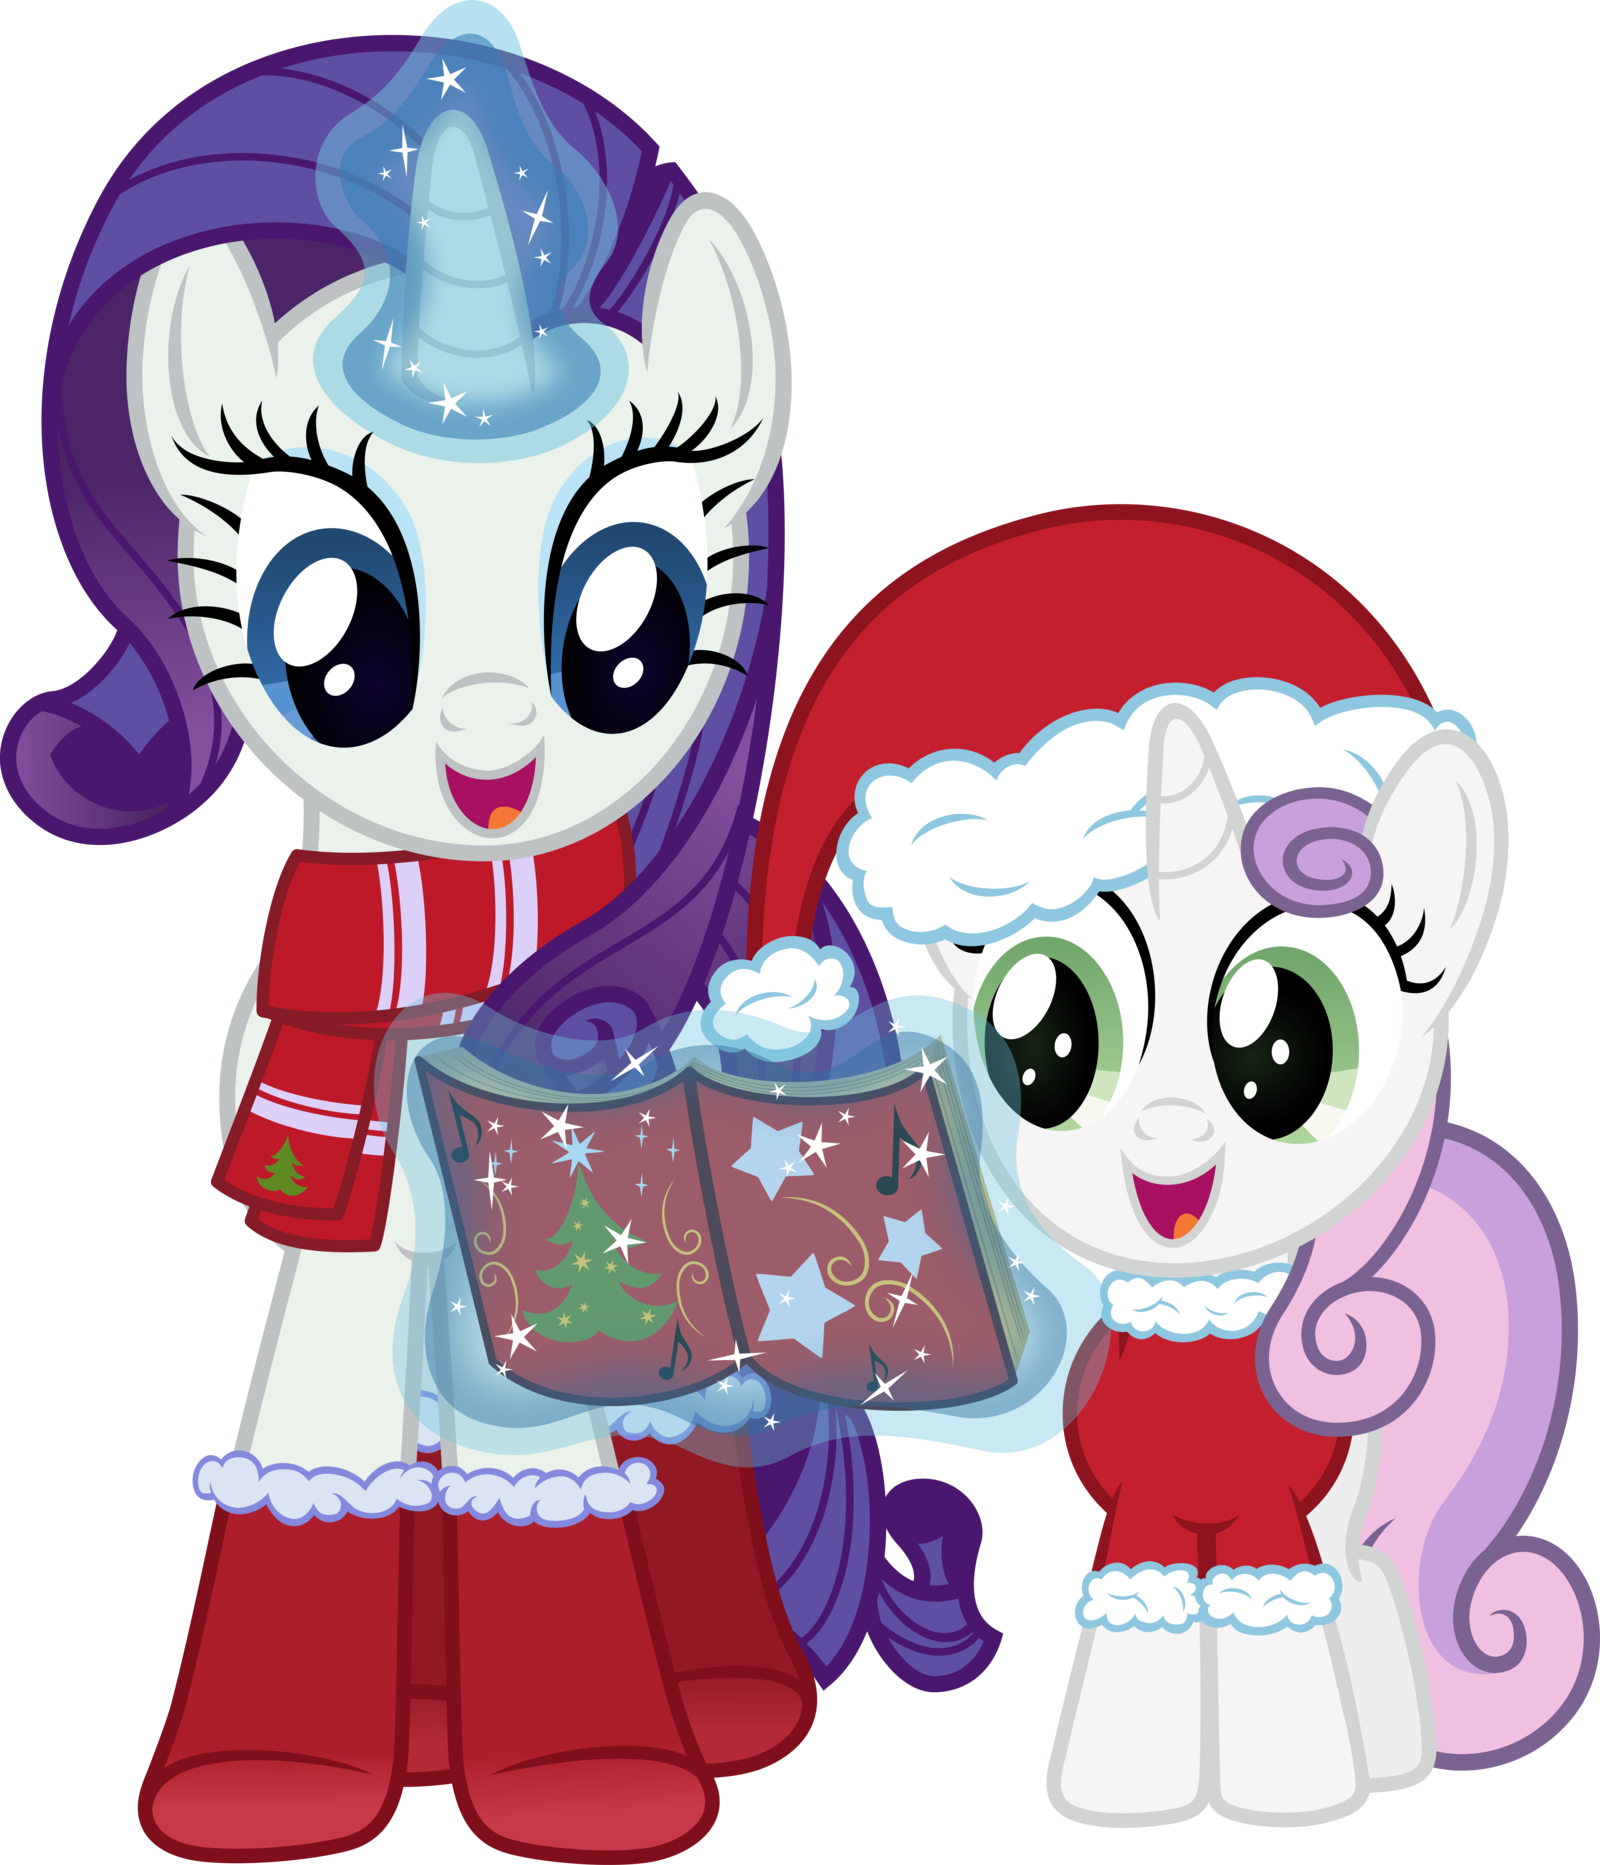 1600x1865, Img 2516752 1 Hearth S Wa ) - My Little Pony Sweetie Belle And Rarity Clipart (1600x1865), Png Download